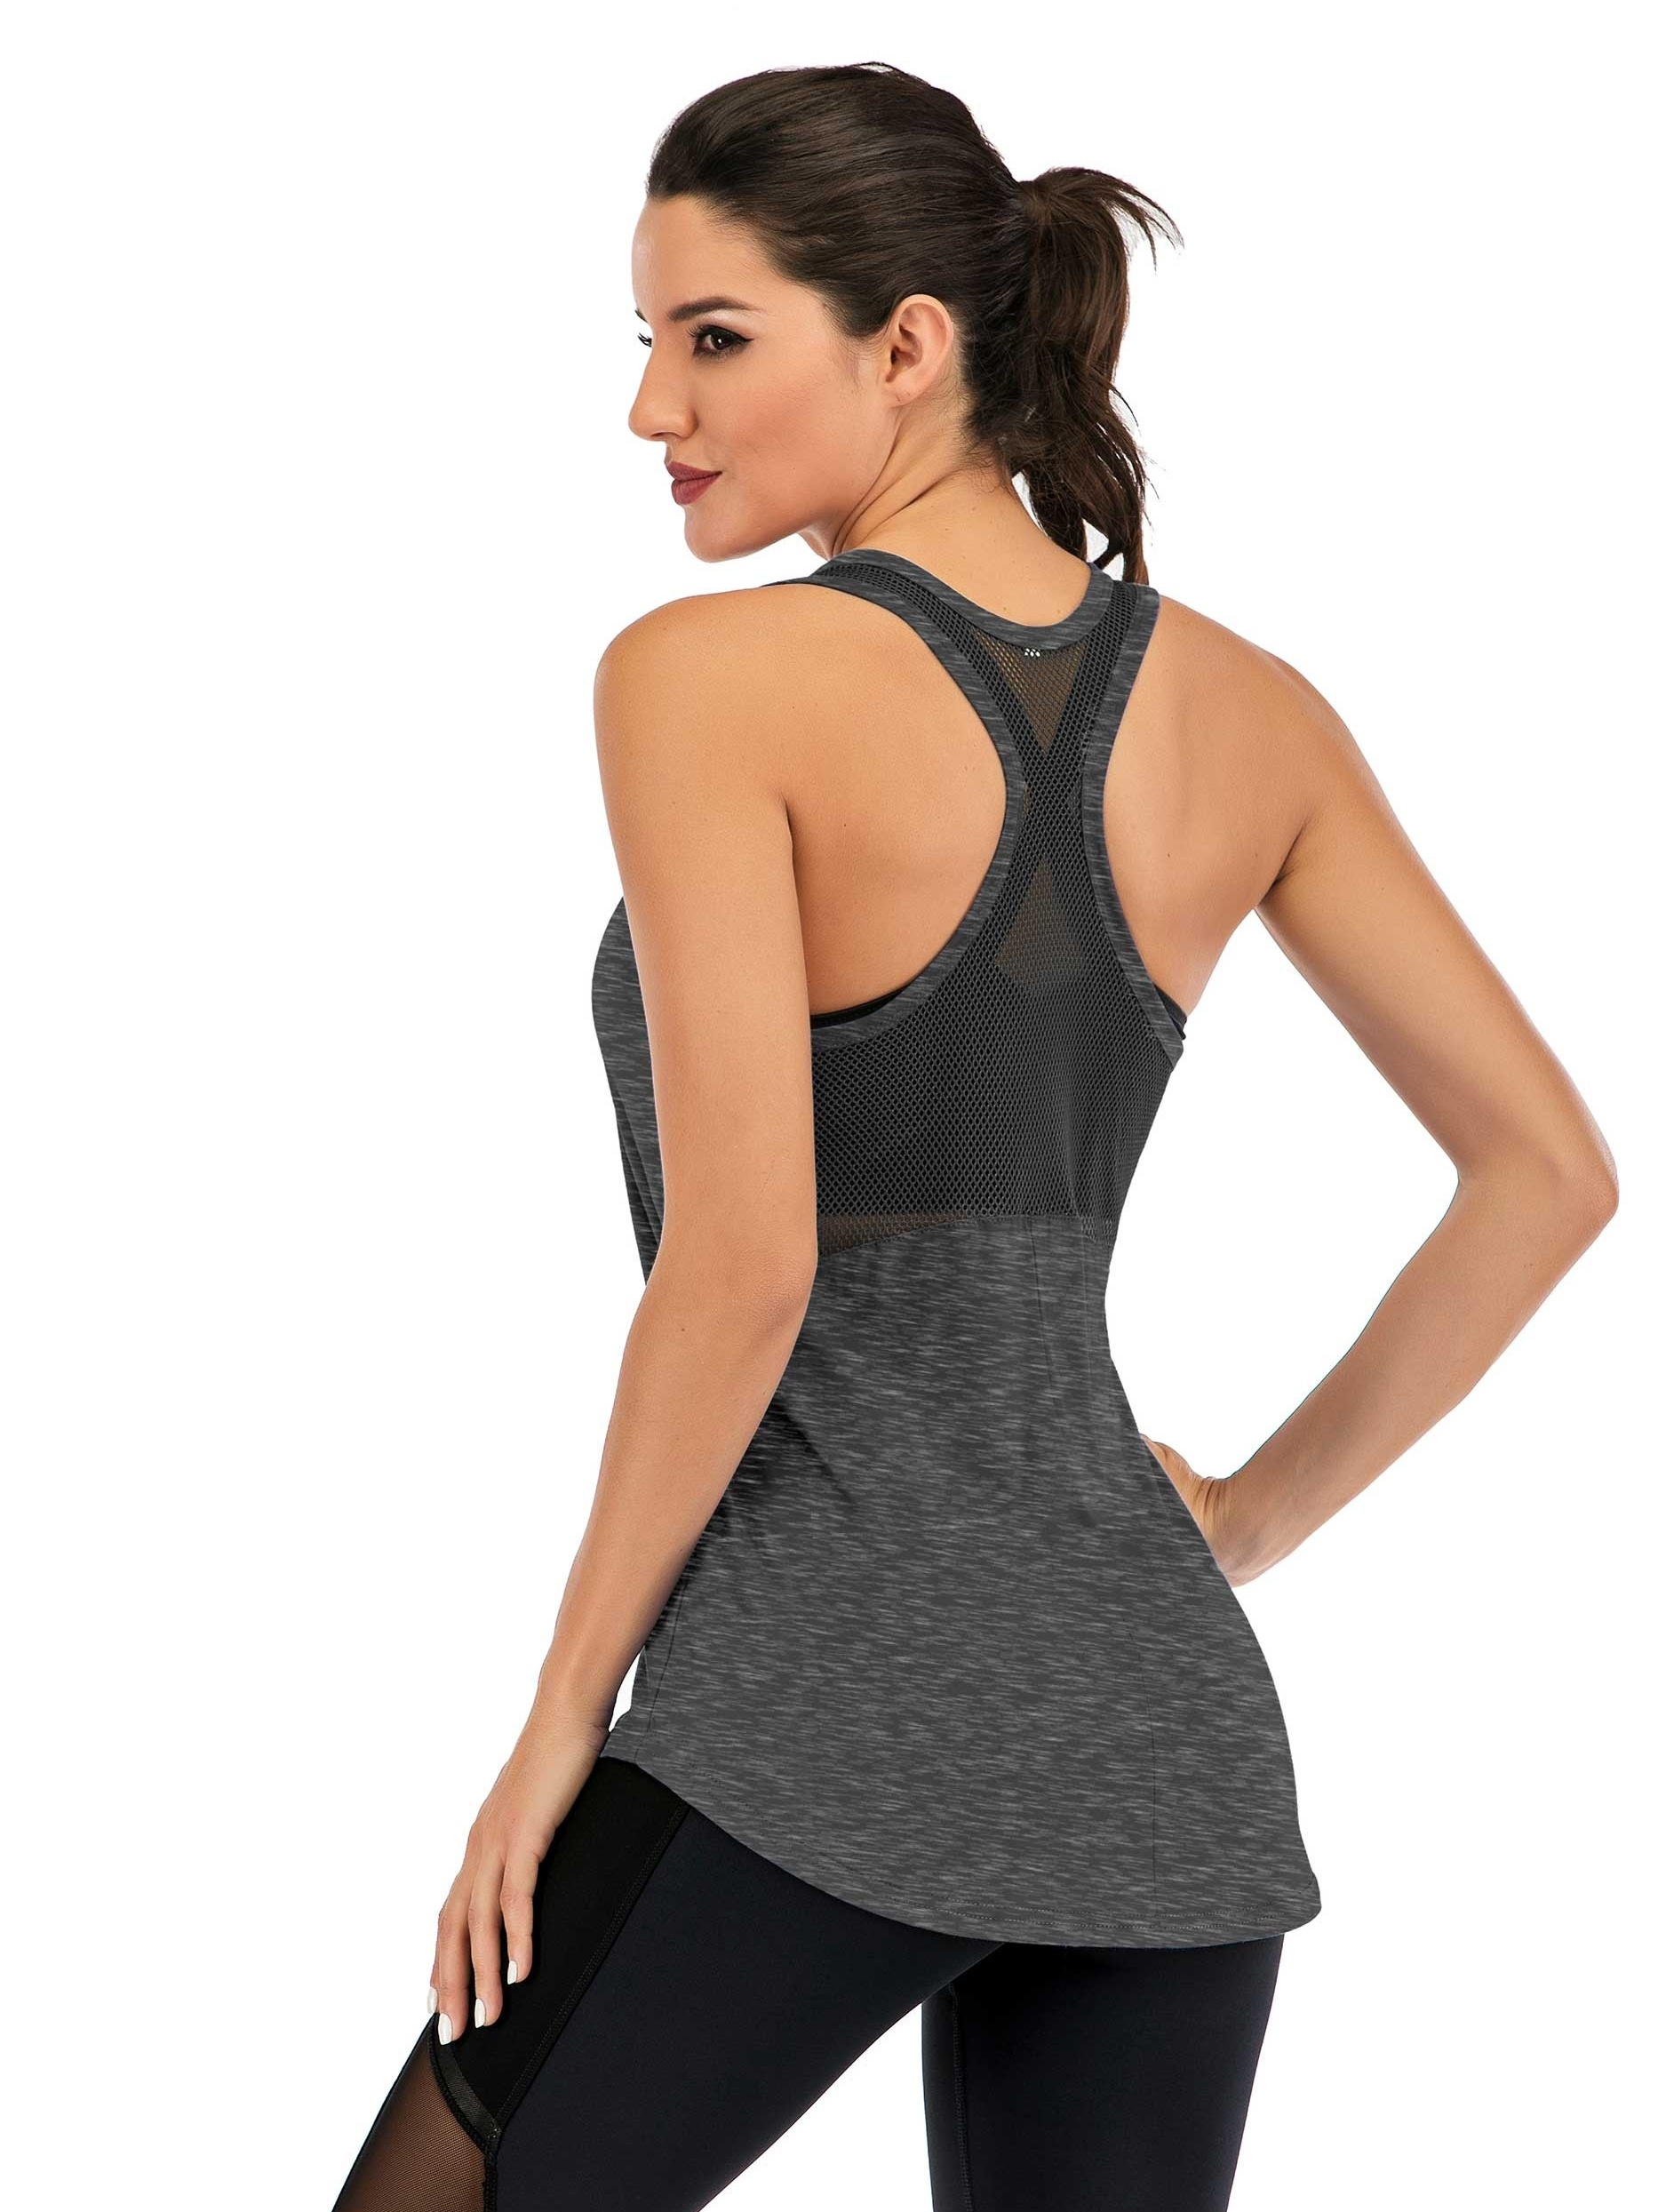 NKOOGH Basic Tops Women Backless Tops for Women Plus Size Womens Girls  Workout Yoga Tops Soft Sleeveless Tank Tops Sleeveless Activewear Tank Tops  